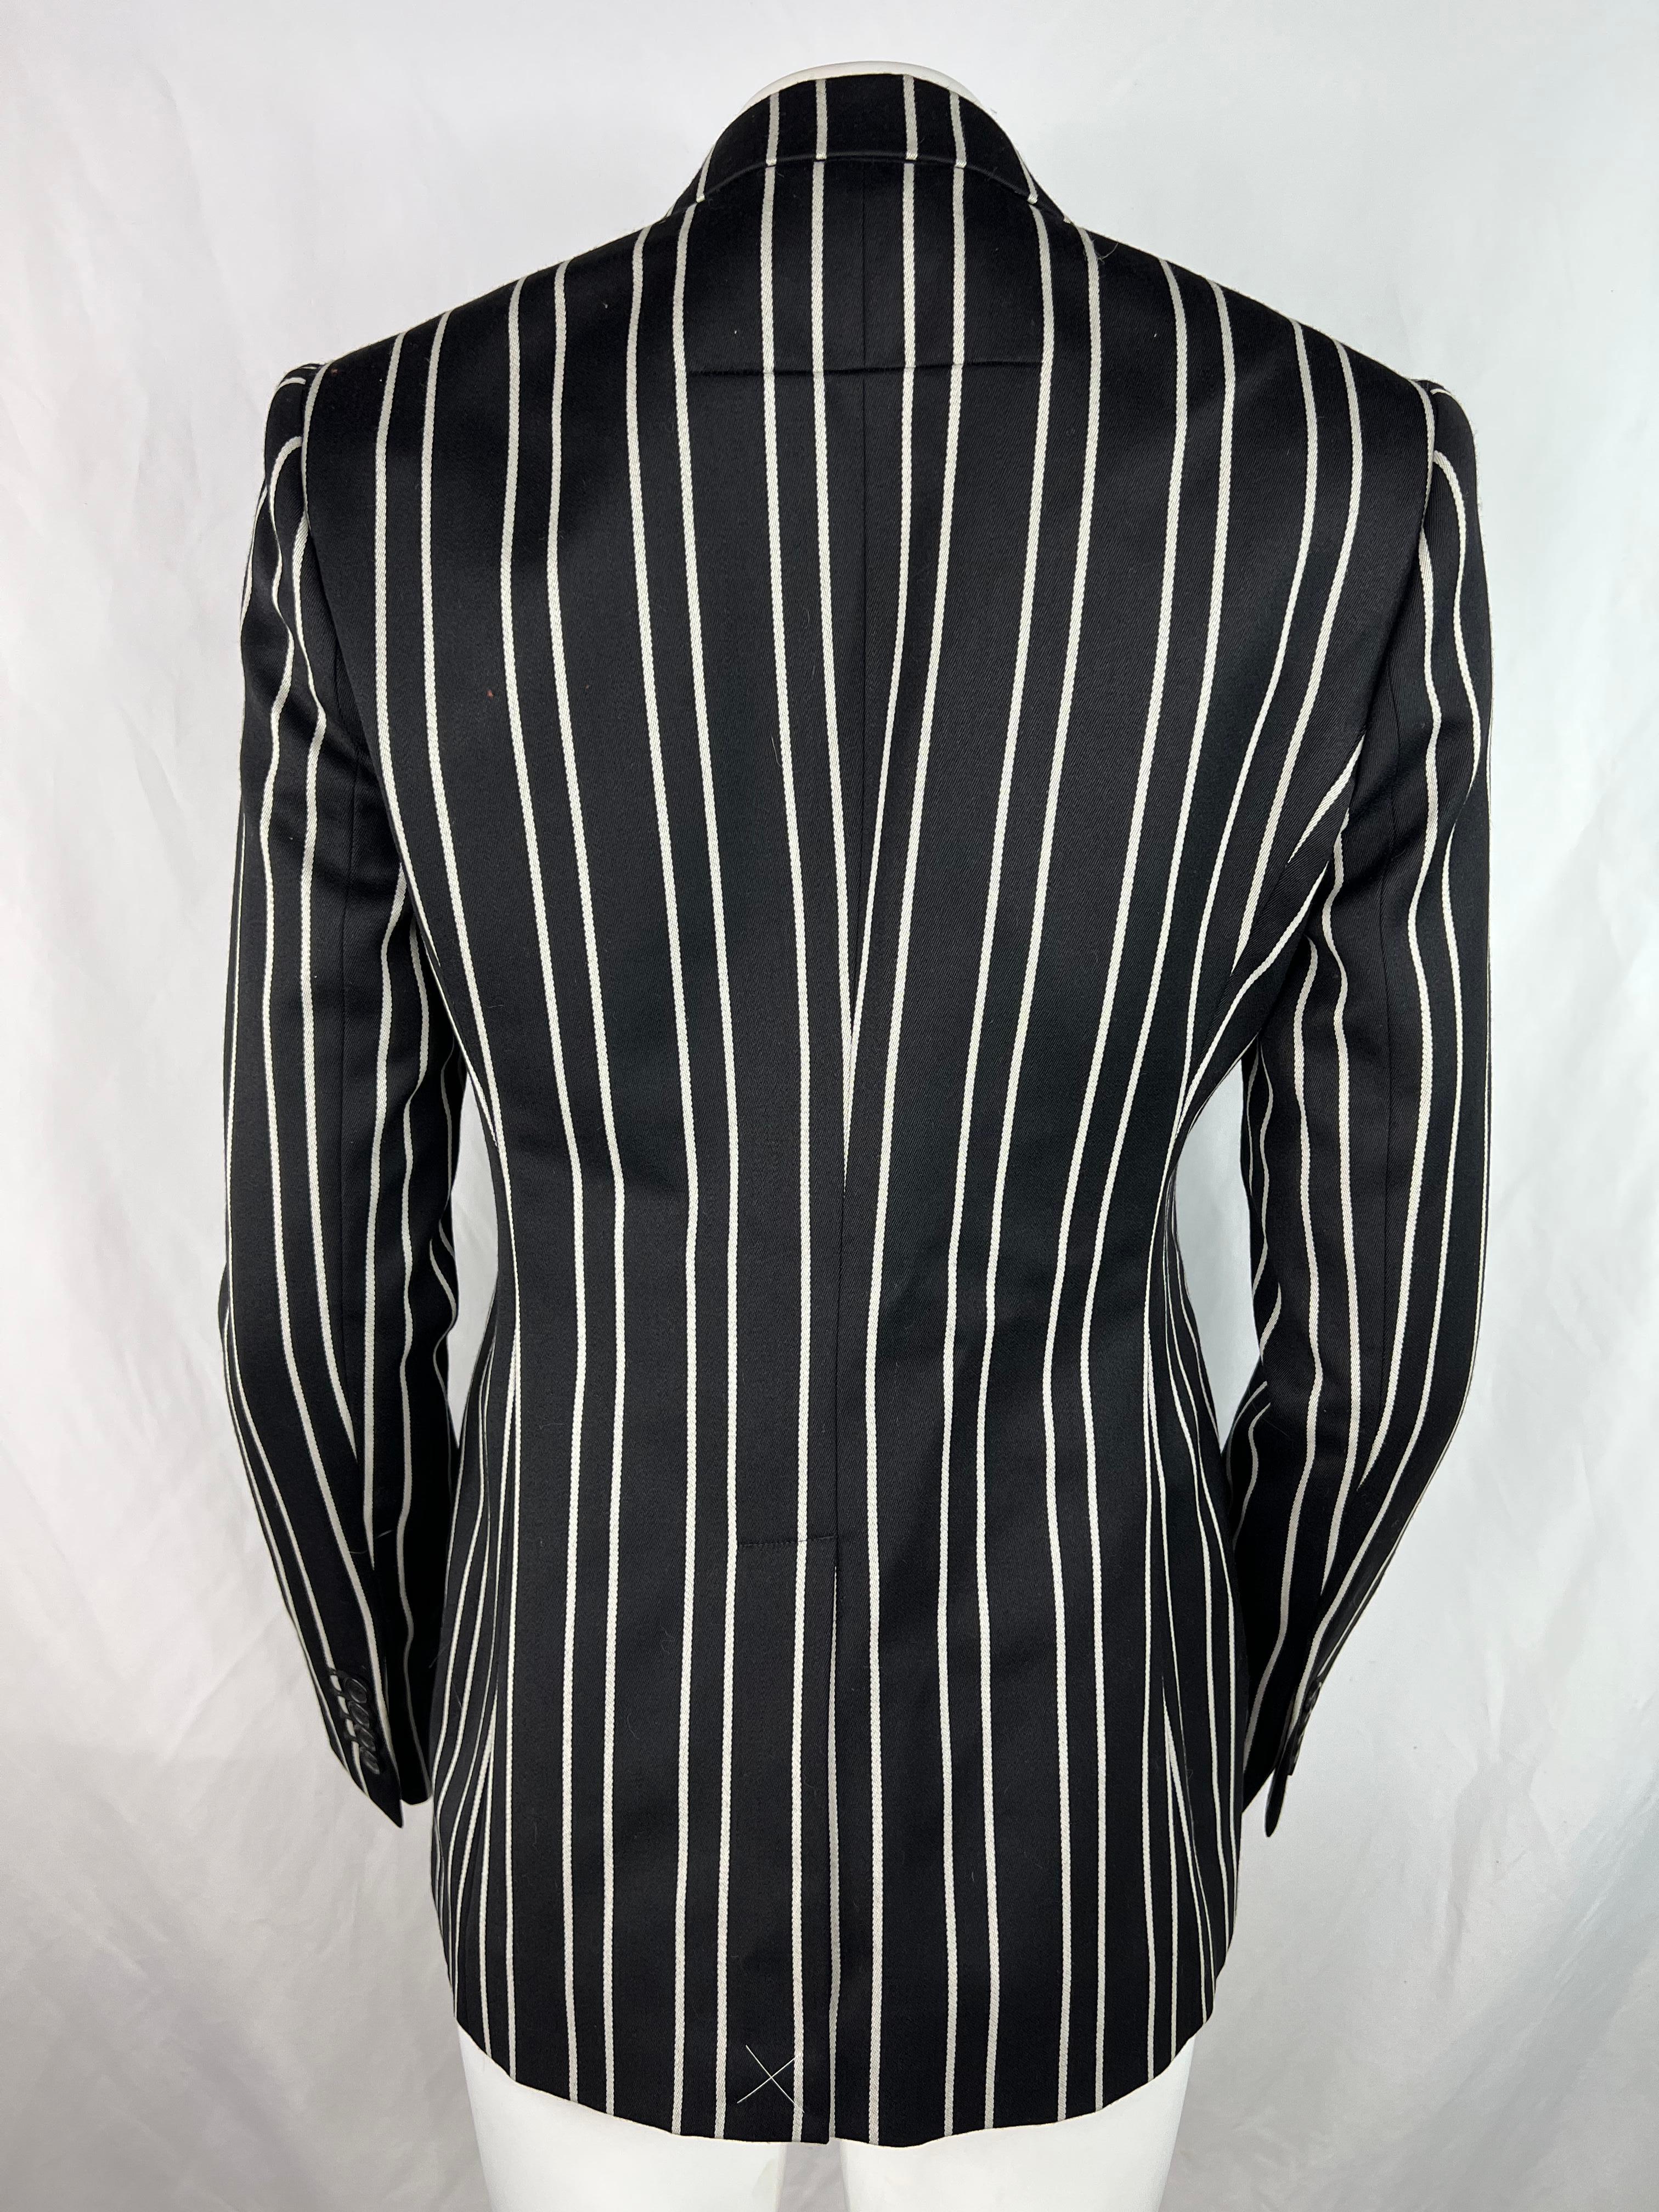 Givenchy Black and White Blazer Jacket, Size 40 In Excellent Condition For Sale In Beverly Hills, CA